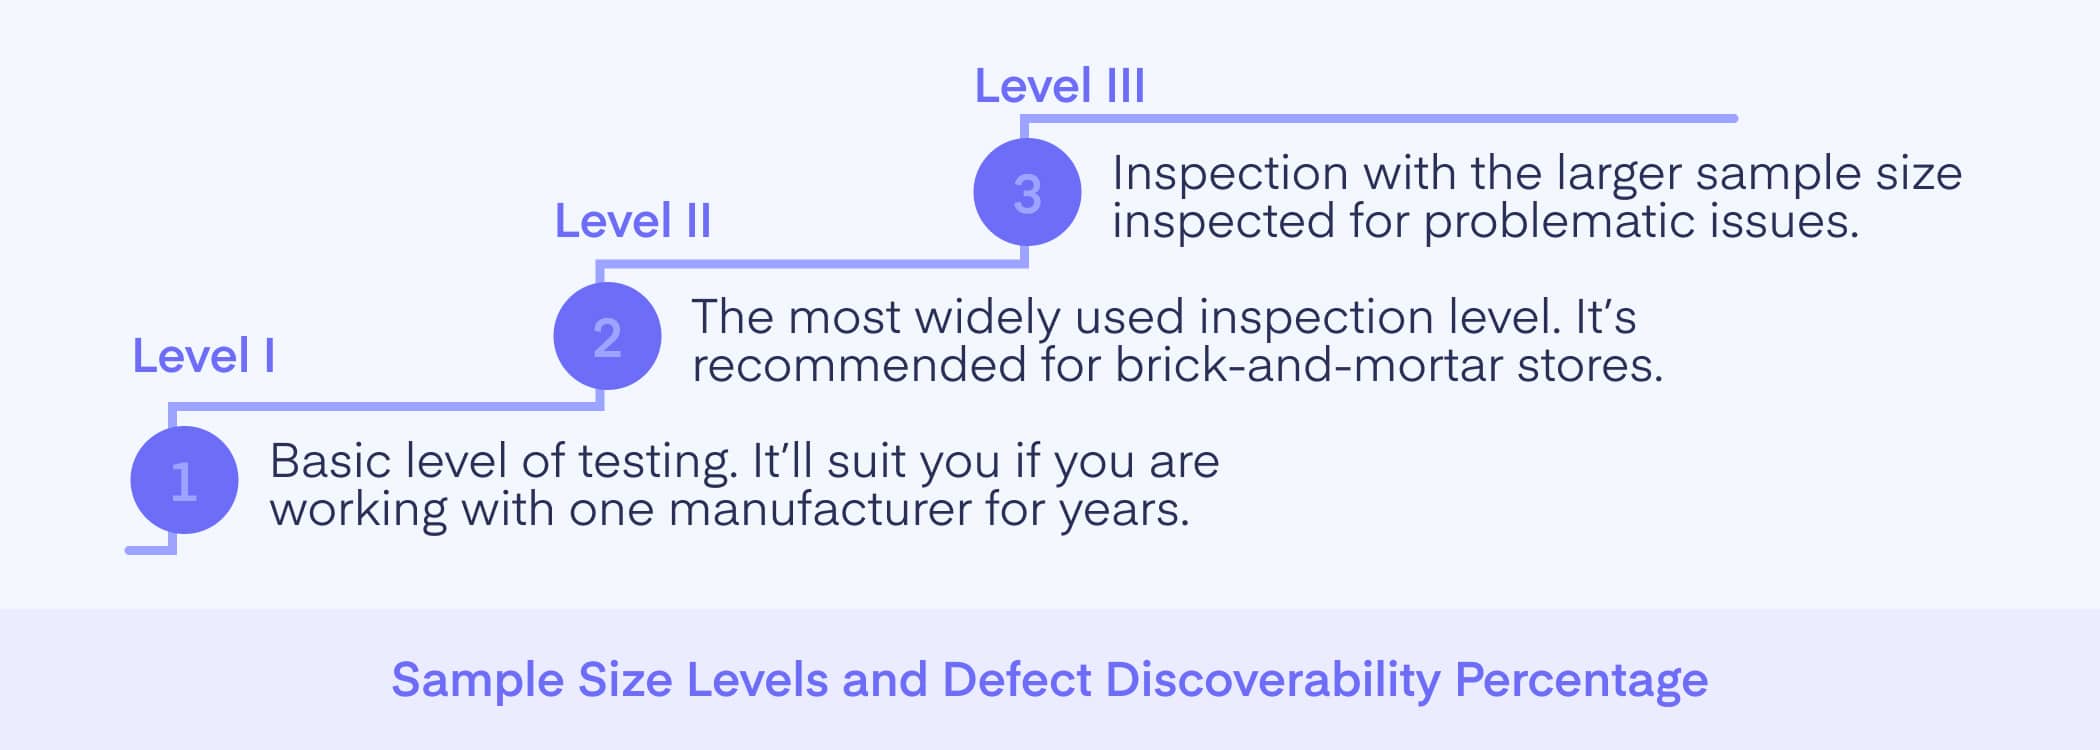 Defect Discoverability Levels